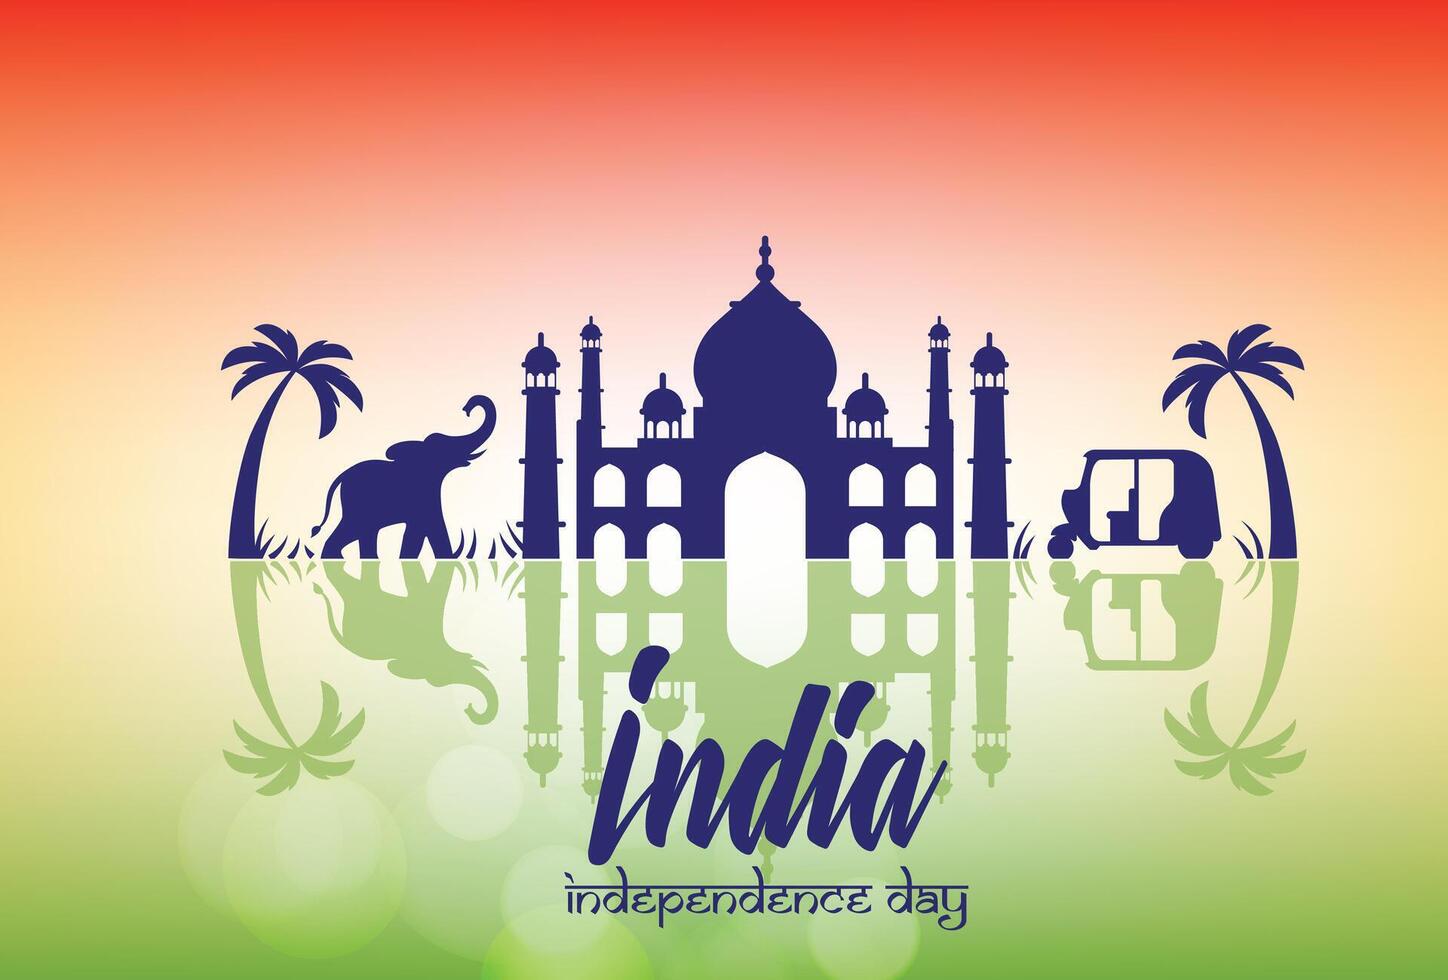 Easy to edit vector illustration of Monument and Landmark of India on Indian Independence Day celebration background